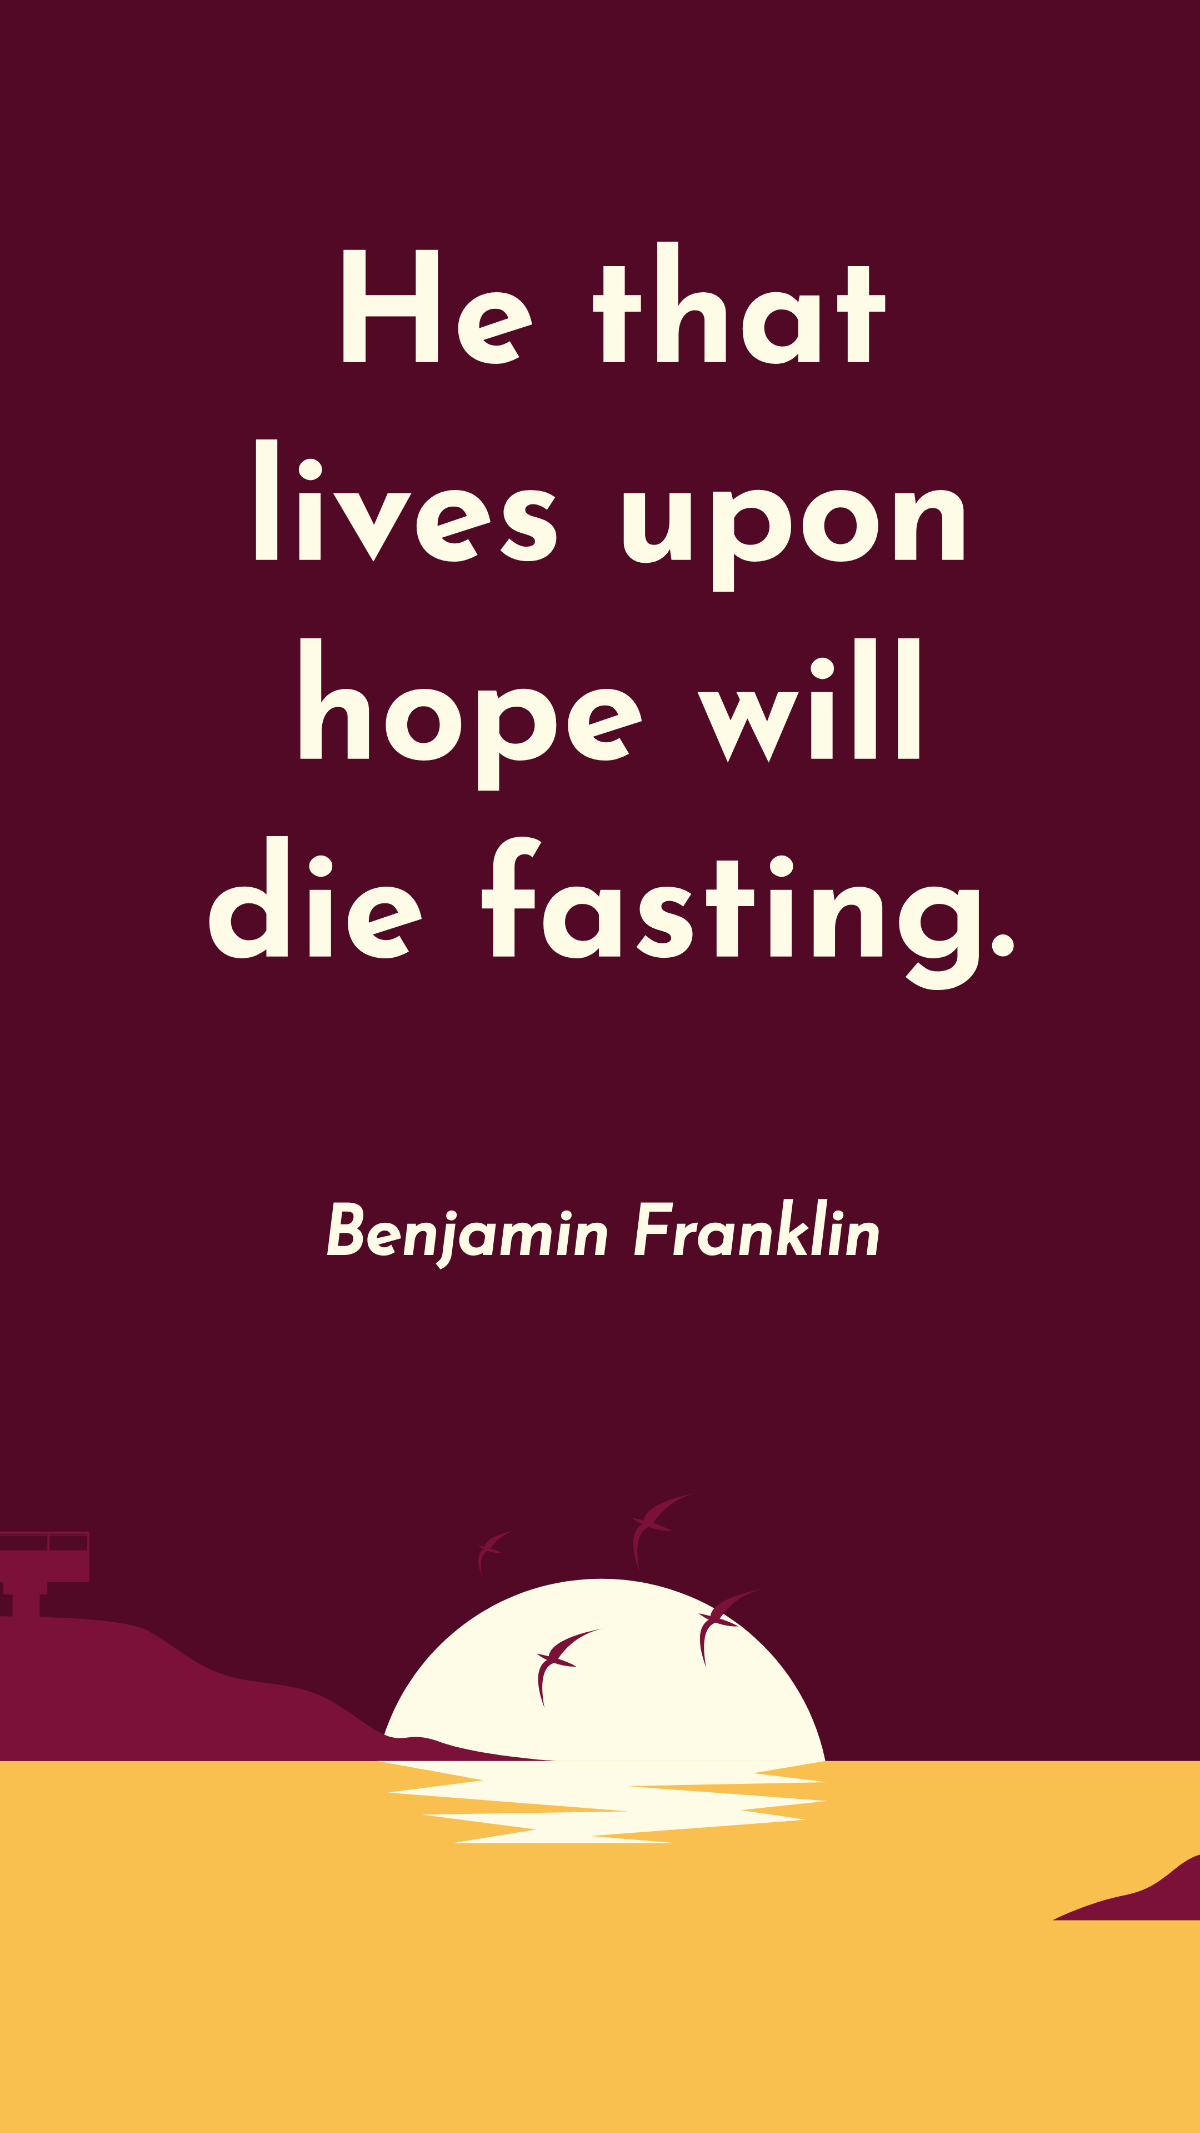 Benjamin Franklin - He that lives upon hope will die fasting. Template